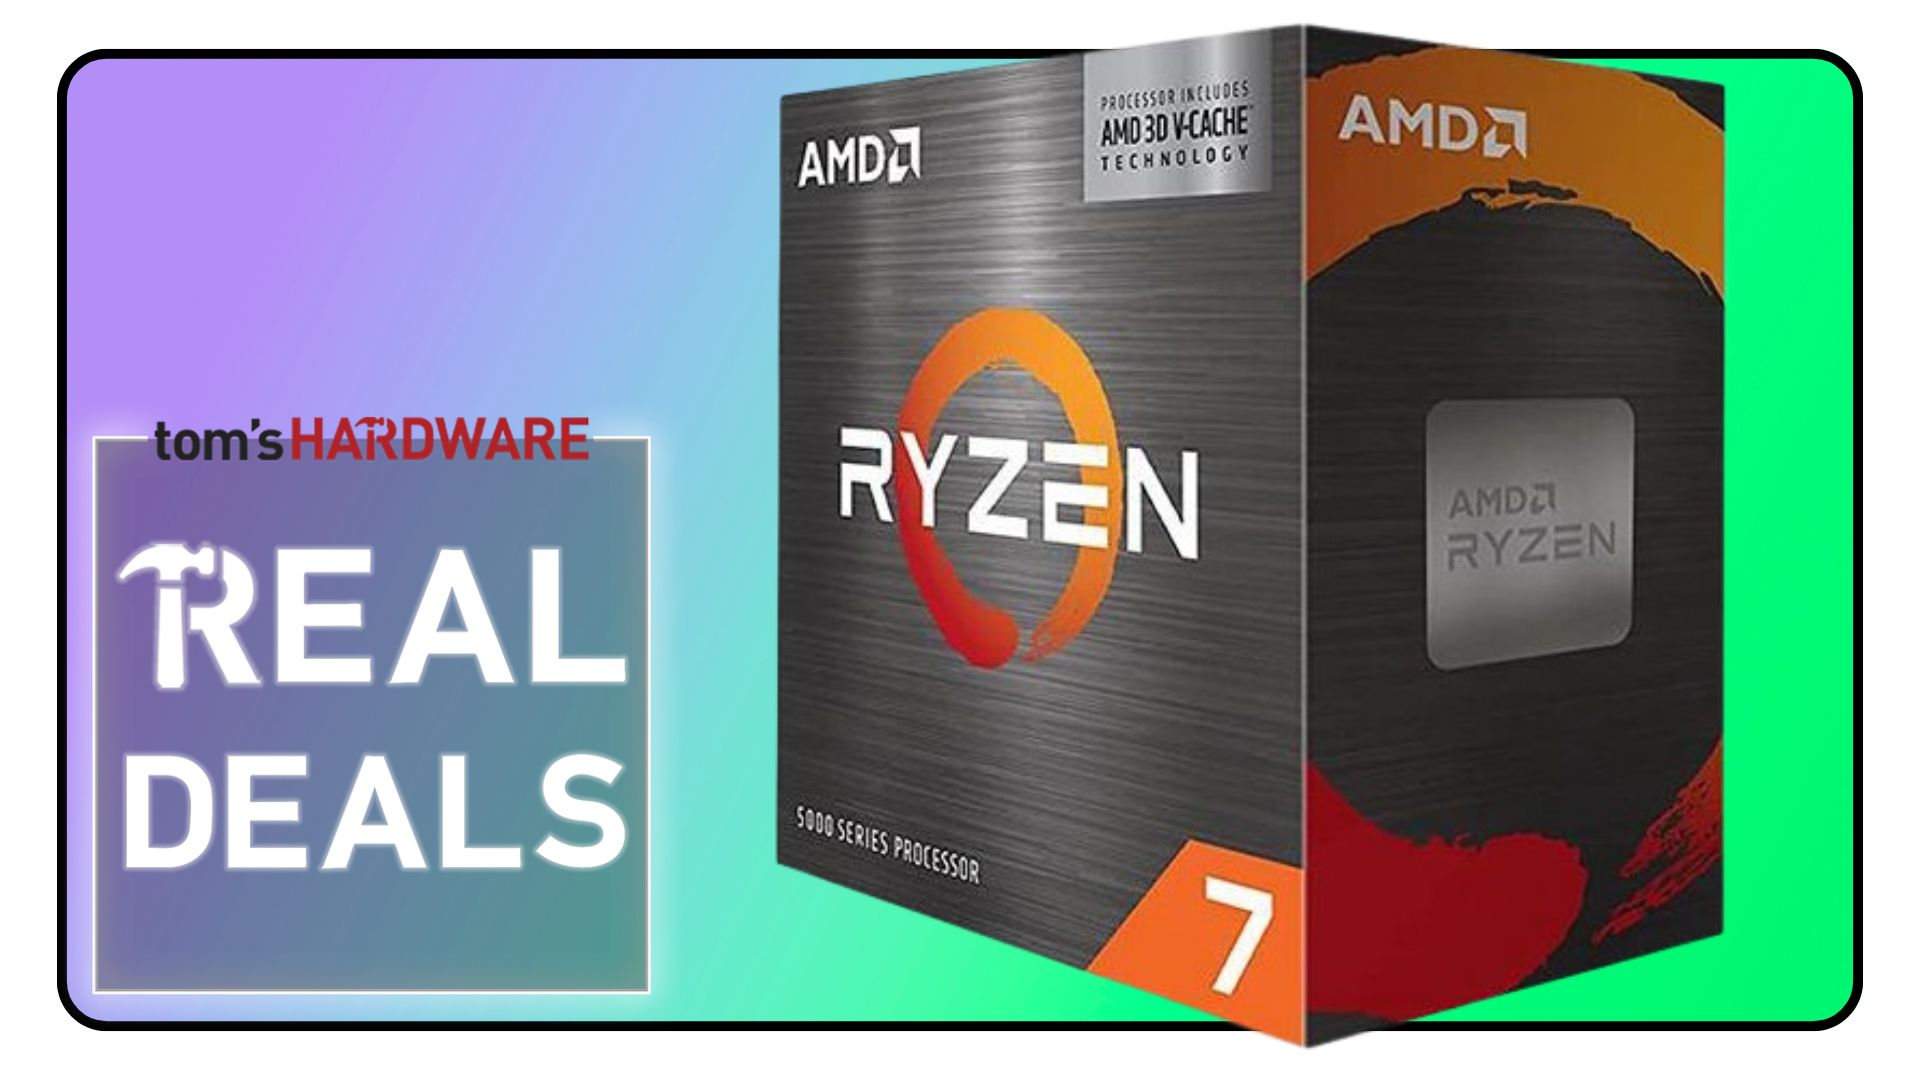 AMD's Ryzen 7 5700X3D, a great AM4 gaming CPU, is now only $229